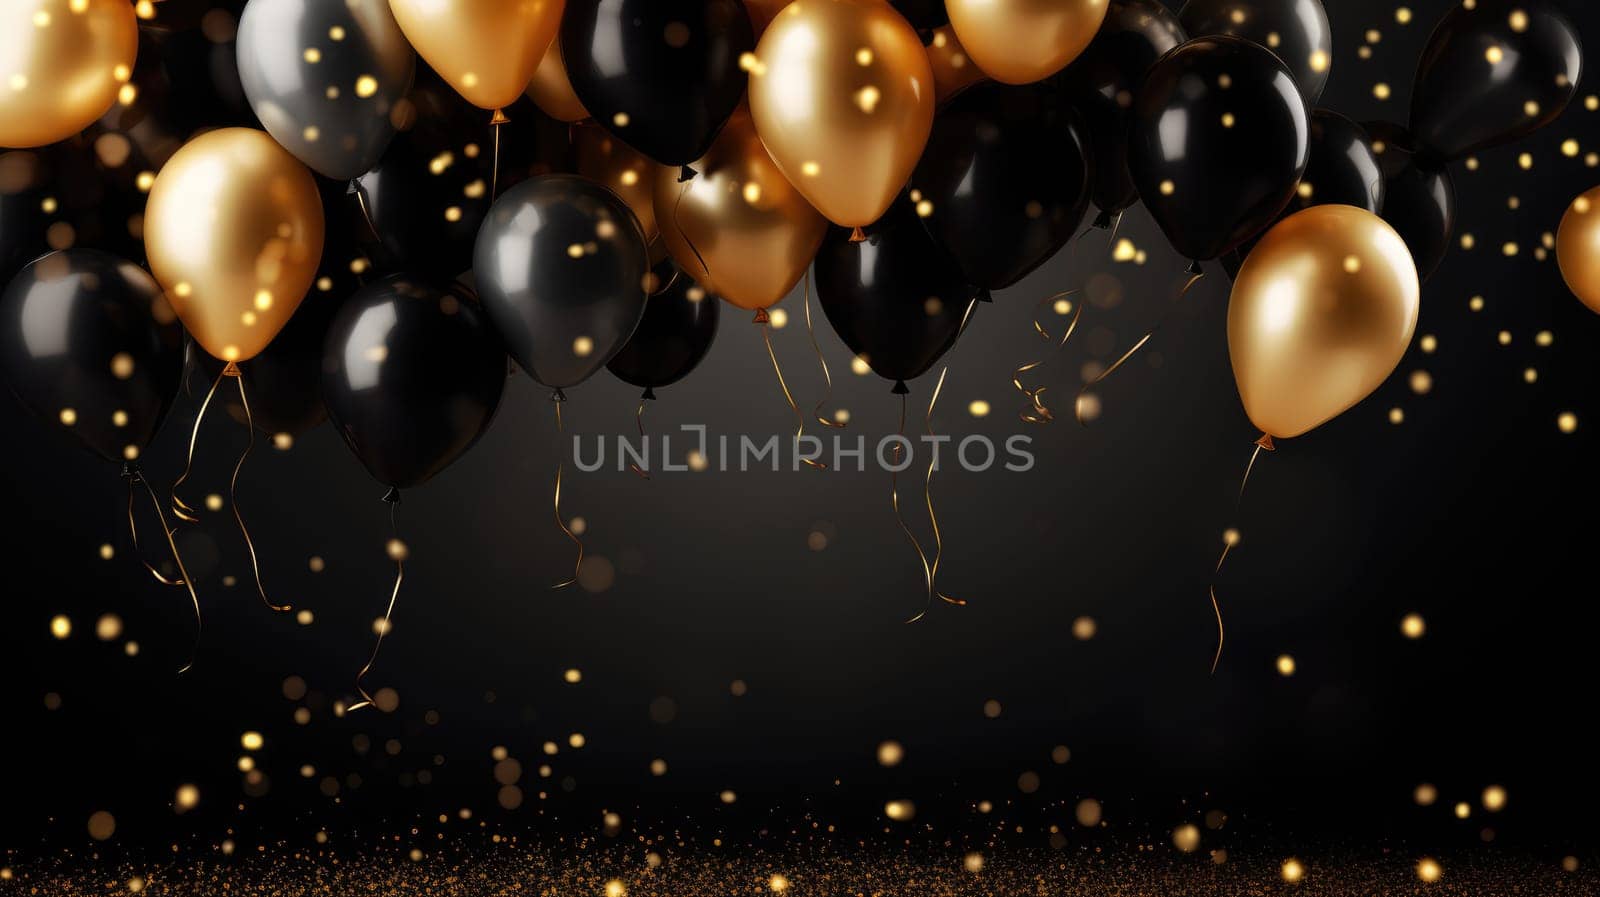 Luxury balloon background border frame in gold and black color by natali_brill